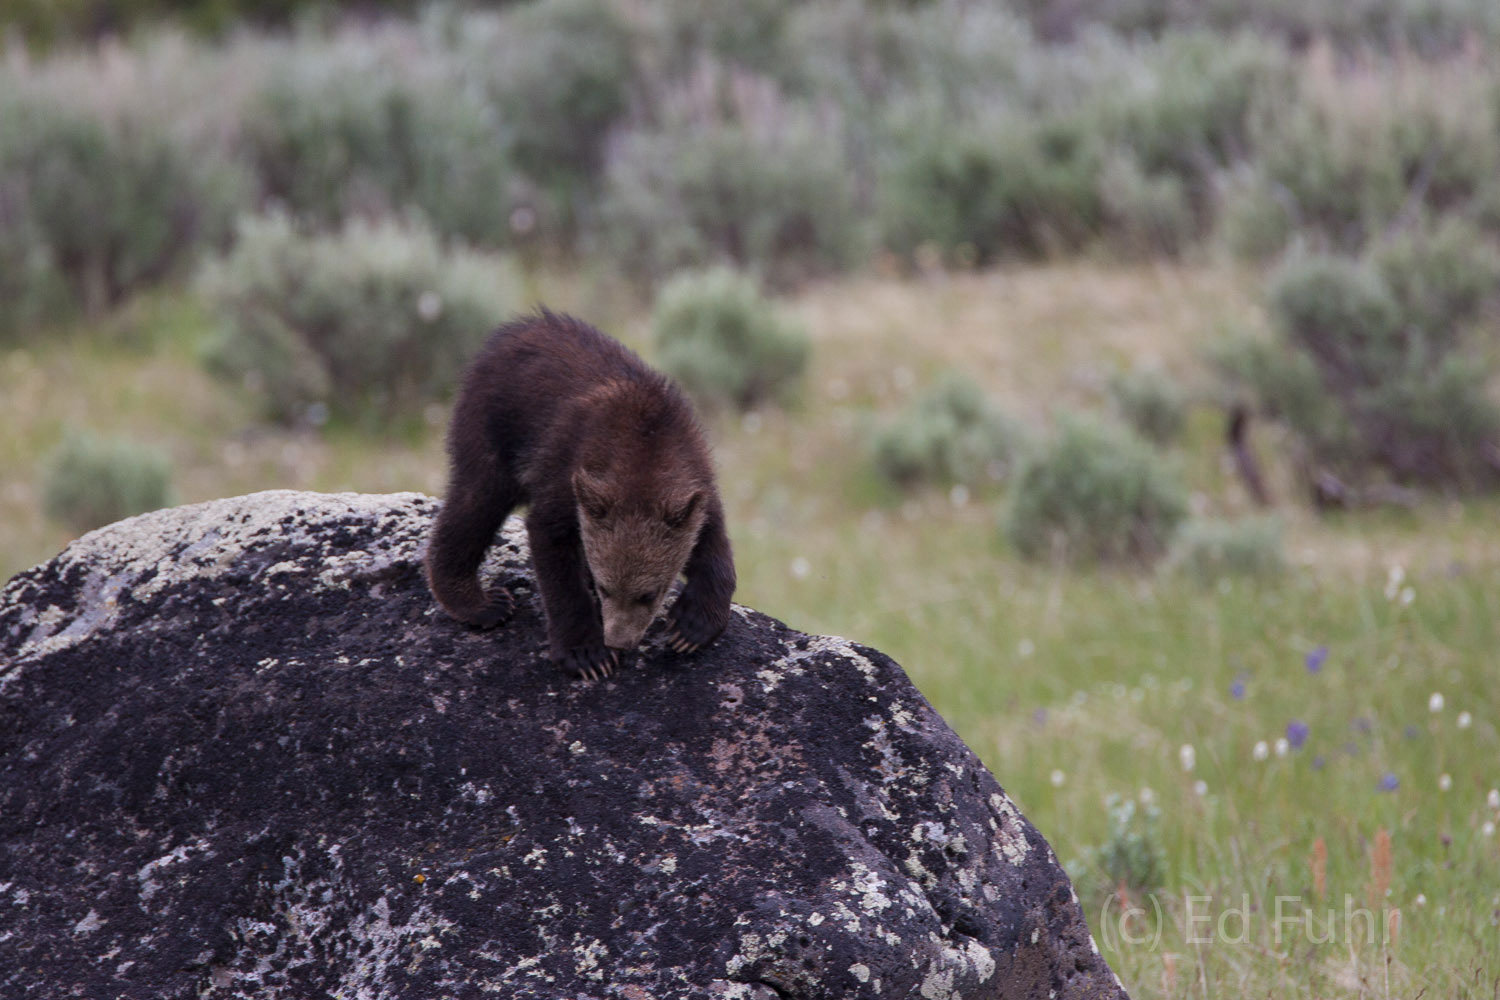 Bear cubs and oftentimes their moms love climbing boulders to get an improve view of their surroundings, and also better to smell...